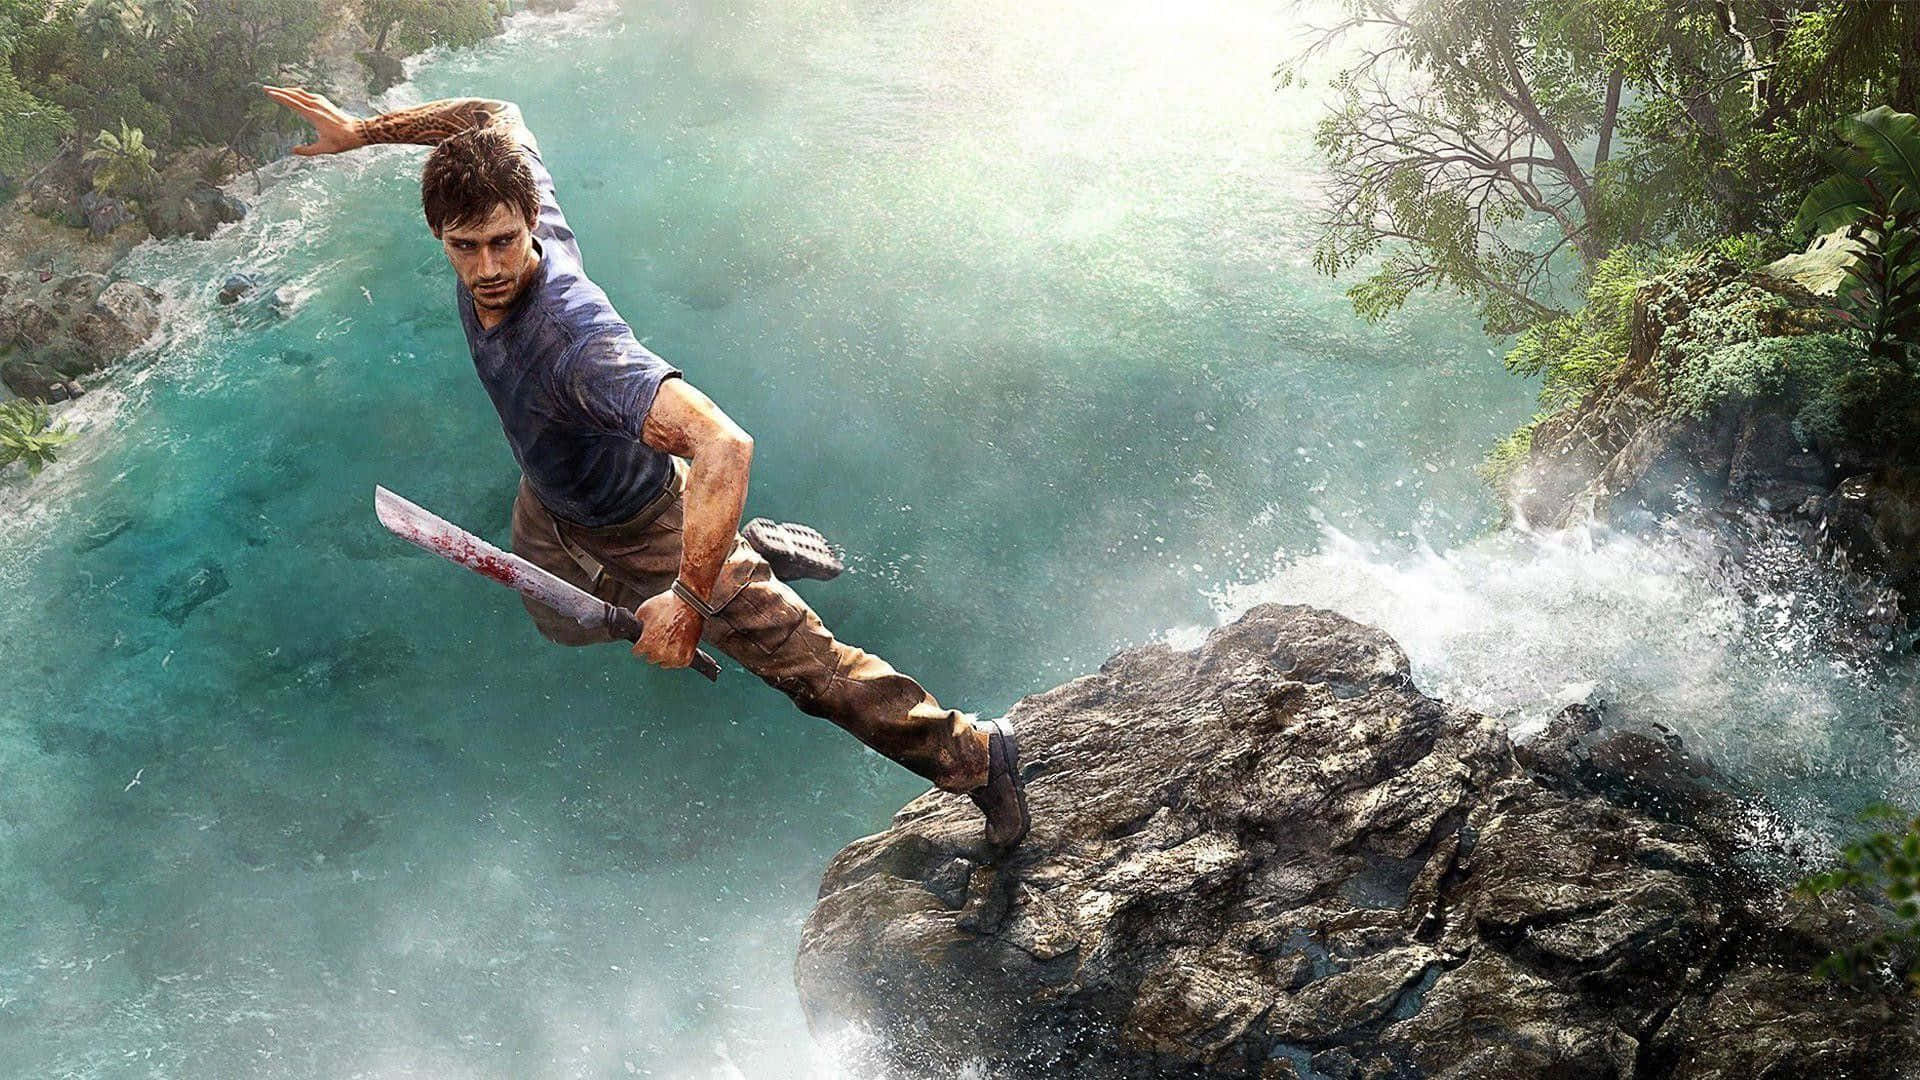 Uncharted 4 - Pc - Pc - Pc - Pc - Pc - Wallpaper